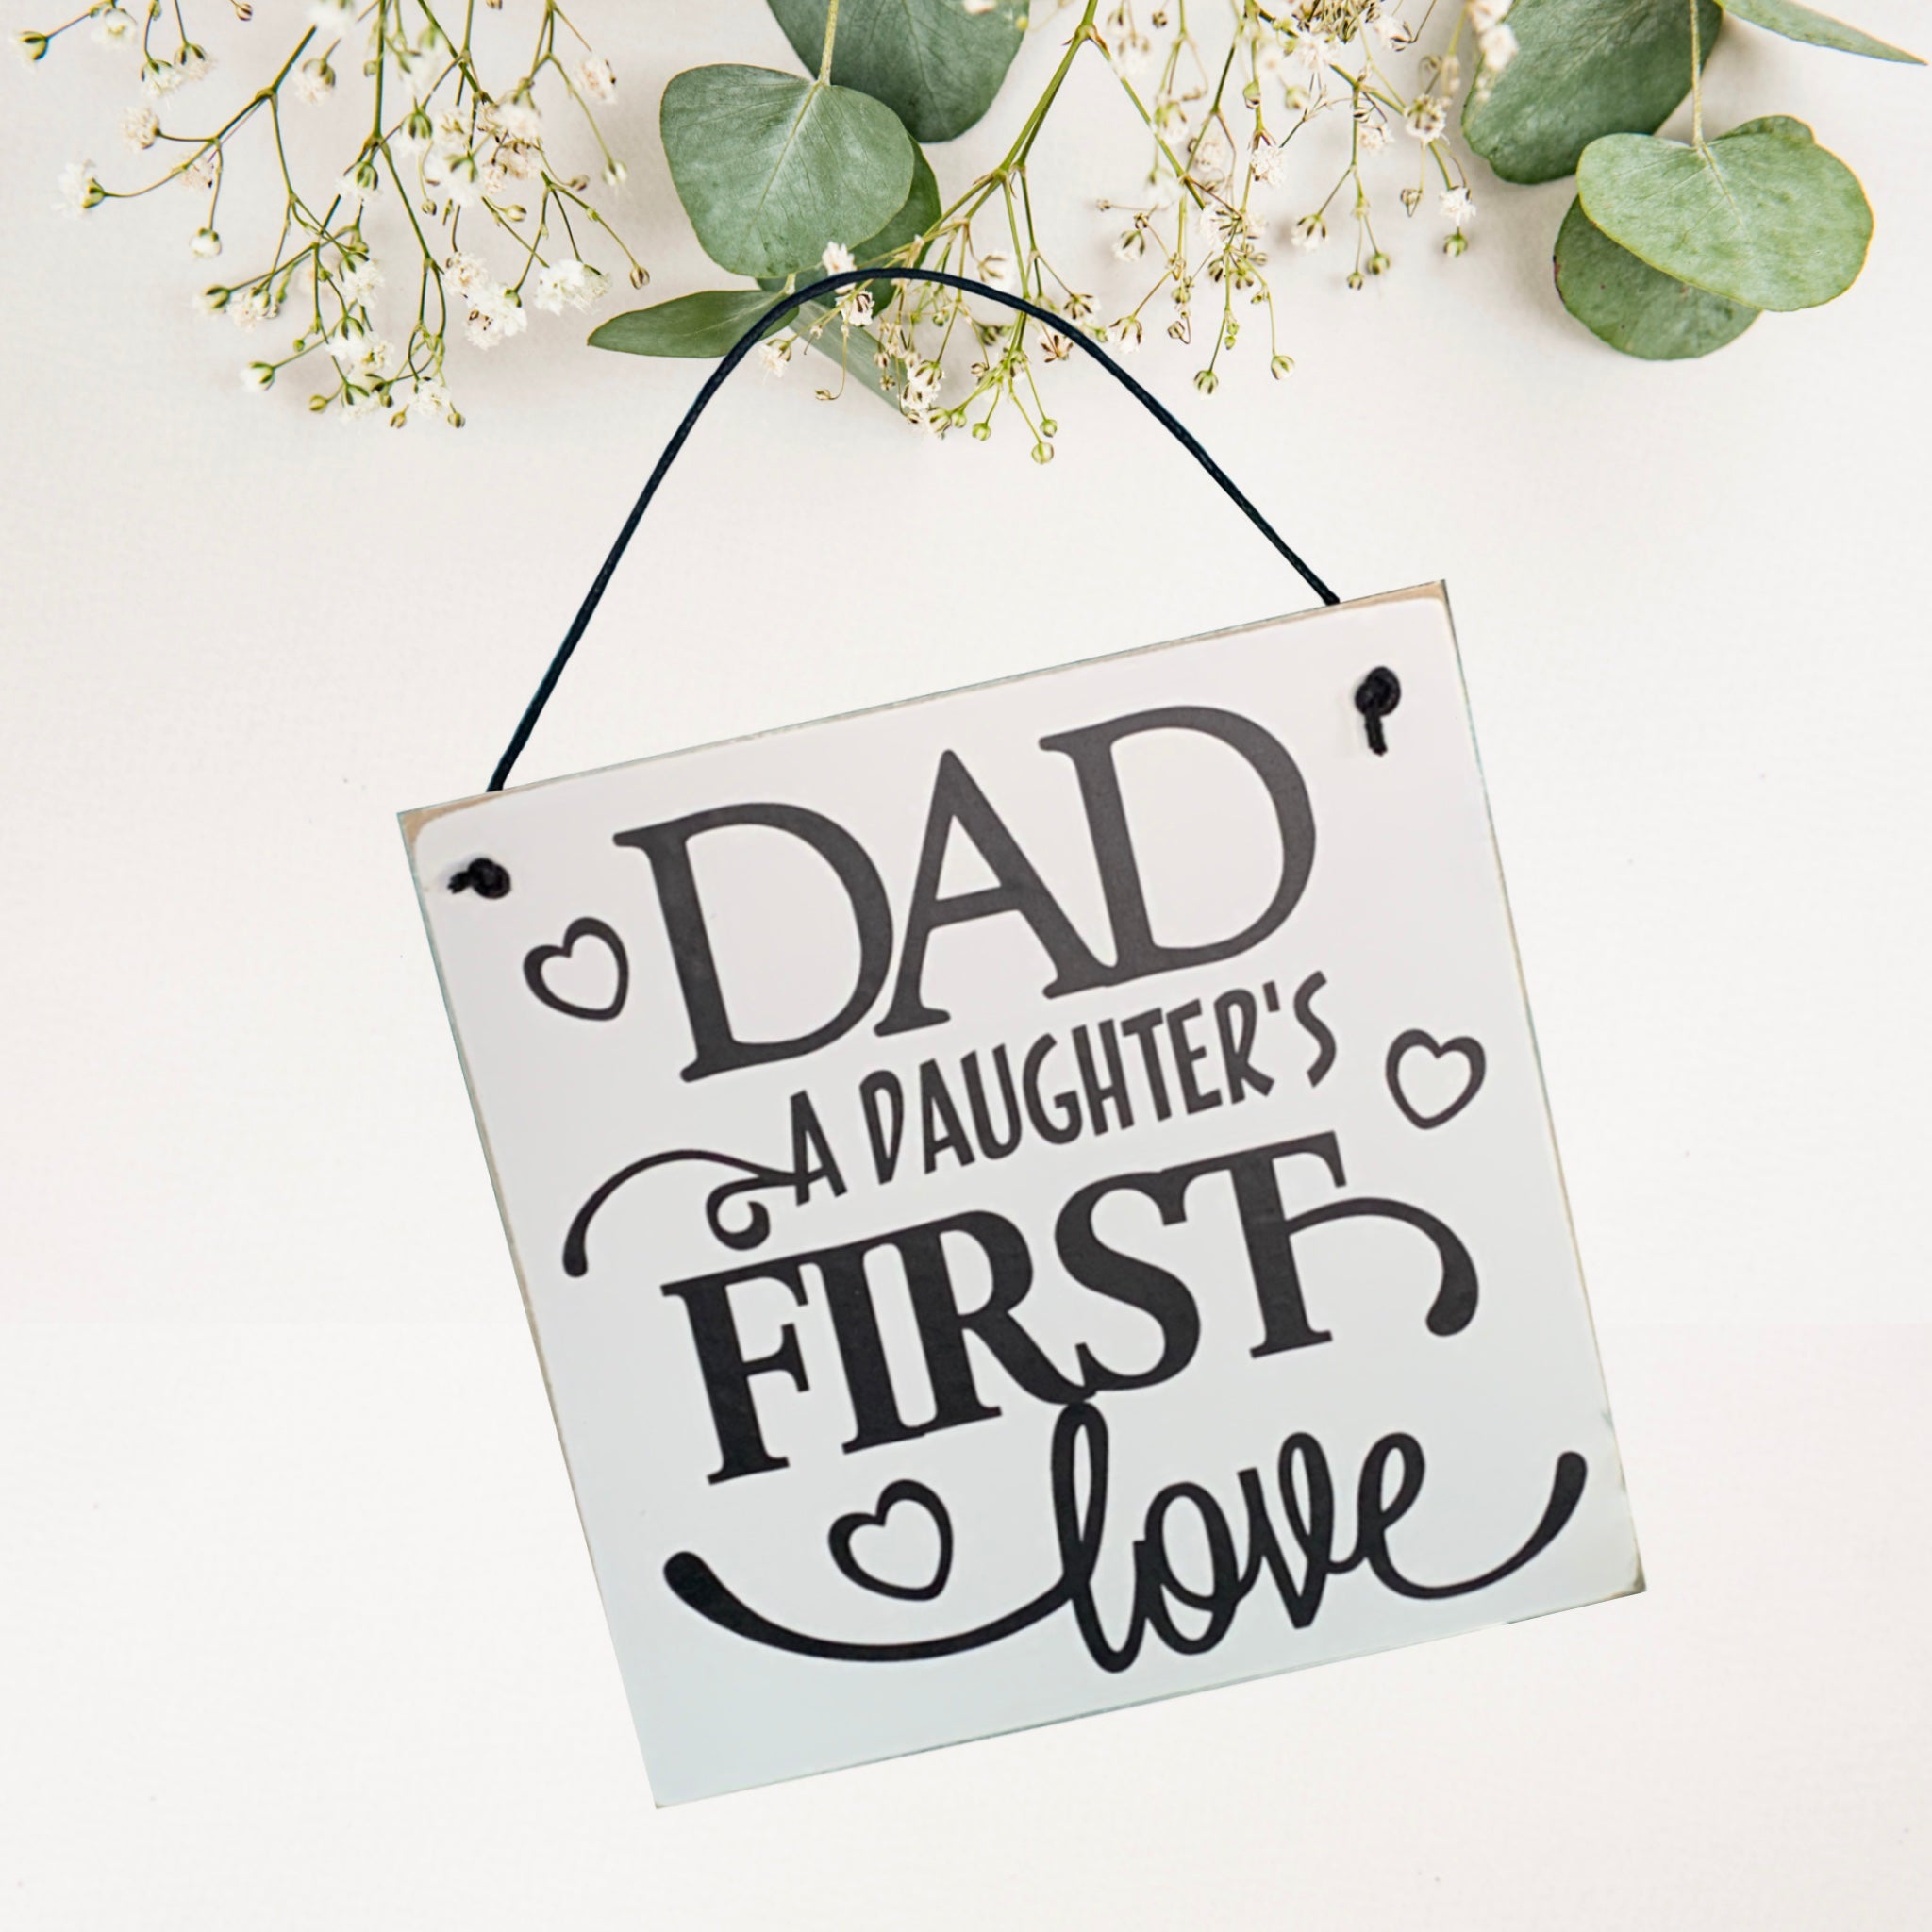 Dad A Daughter’s first love | 15cm x 15cm Sign | wall plaque